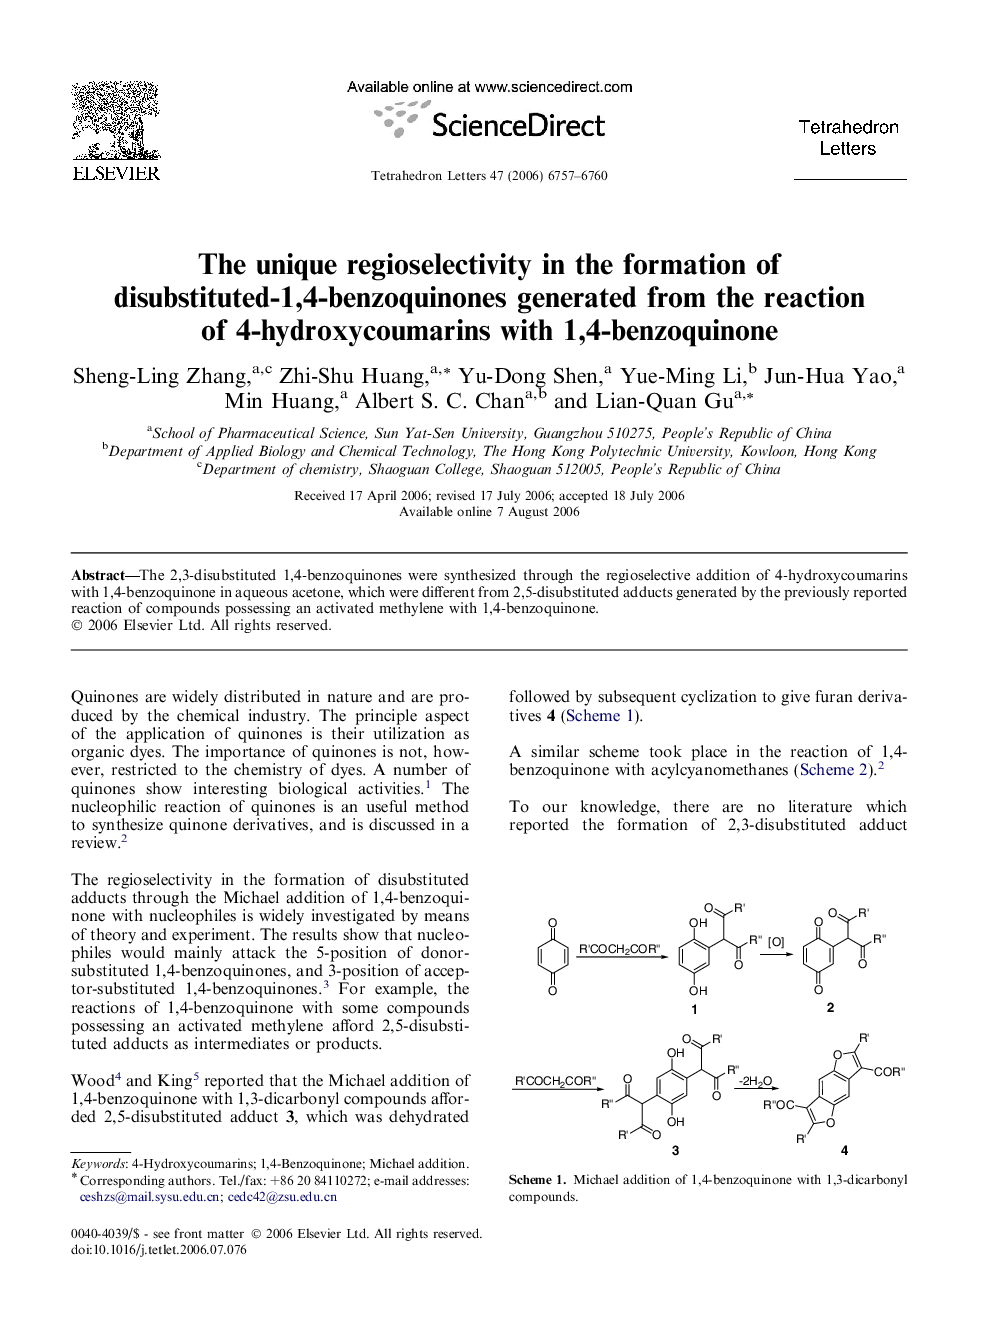 The unique regioselectivity in the formation of disubstituted-1,4-benzoquinones generated from the reaction of 4-hydroxycoumarins with 1,4-benzoquinone